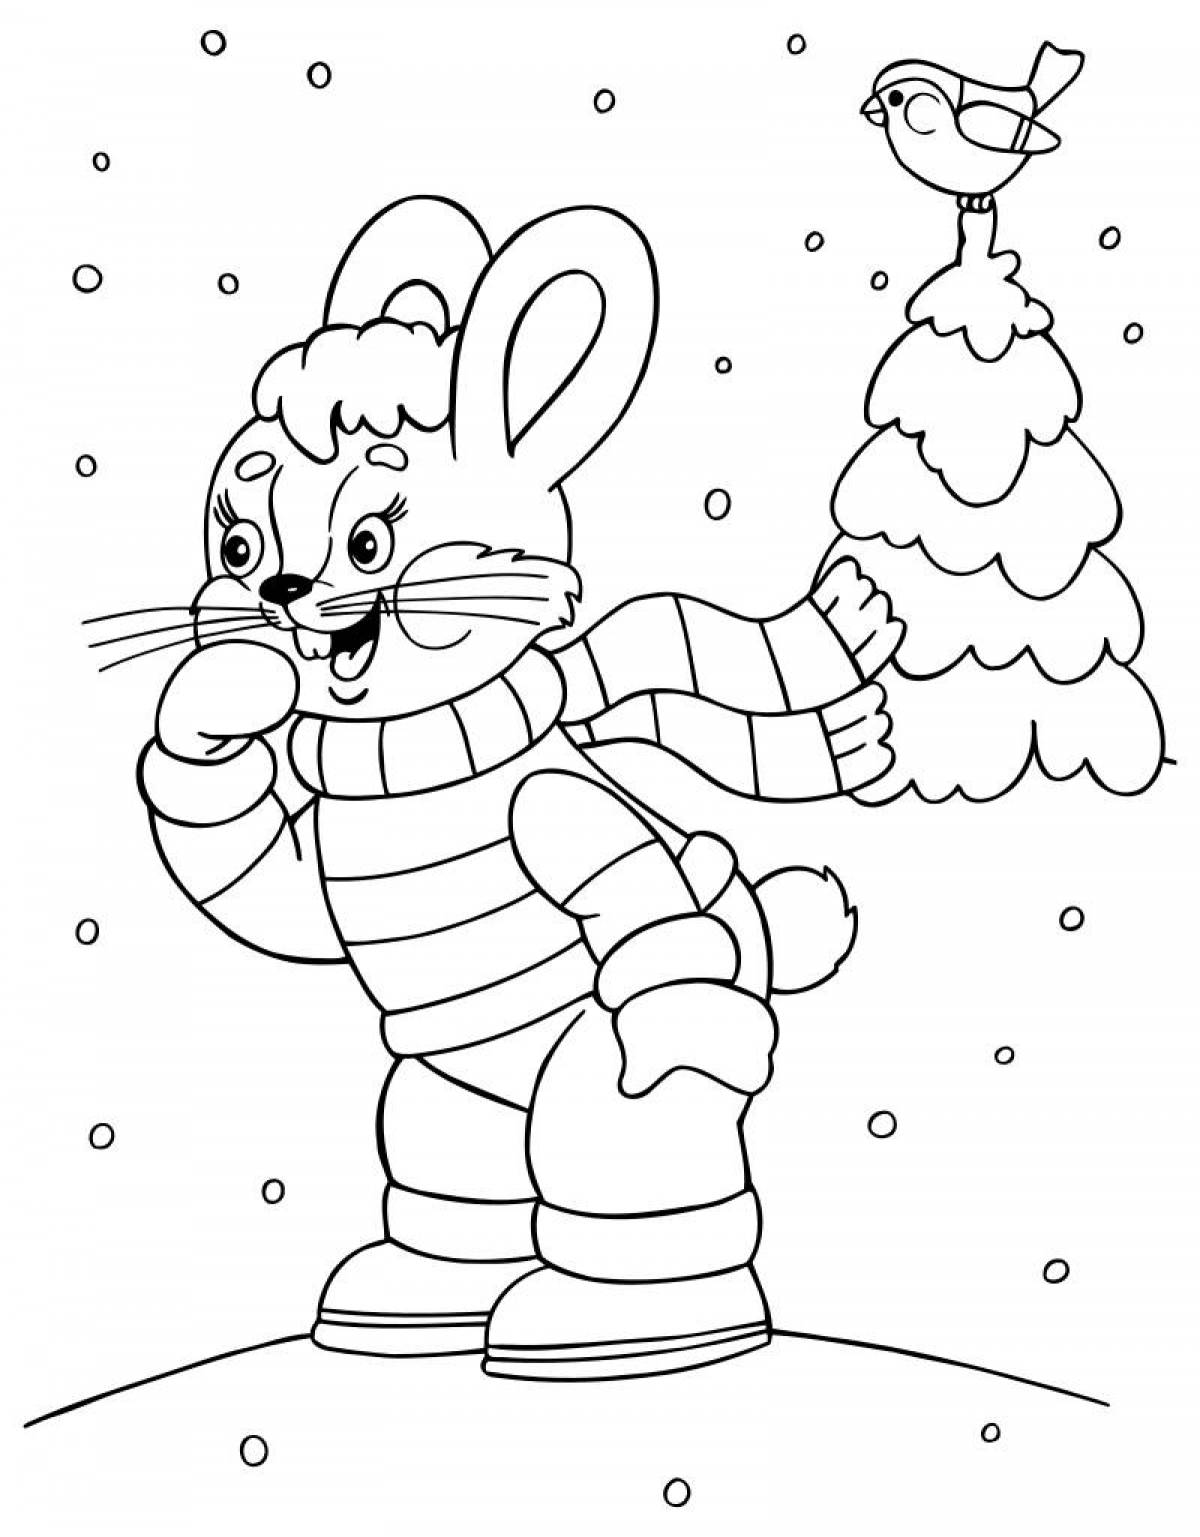 Bright coloring winter for children 4-5 years old